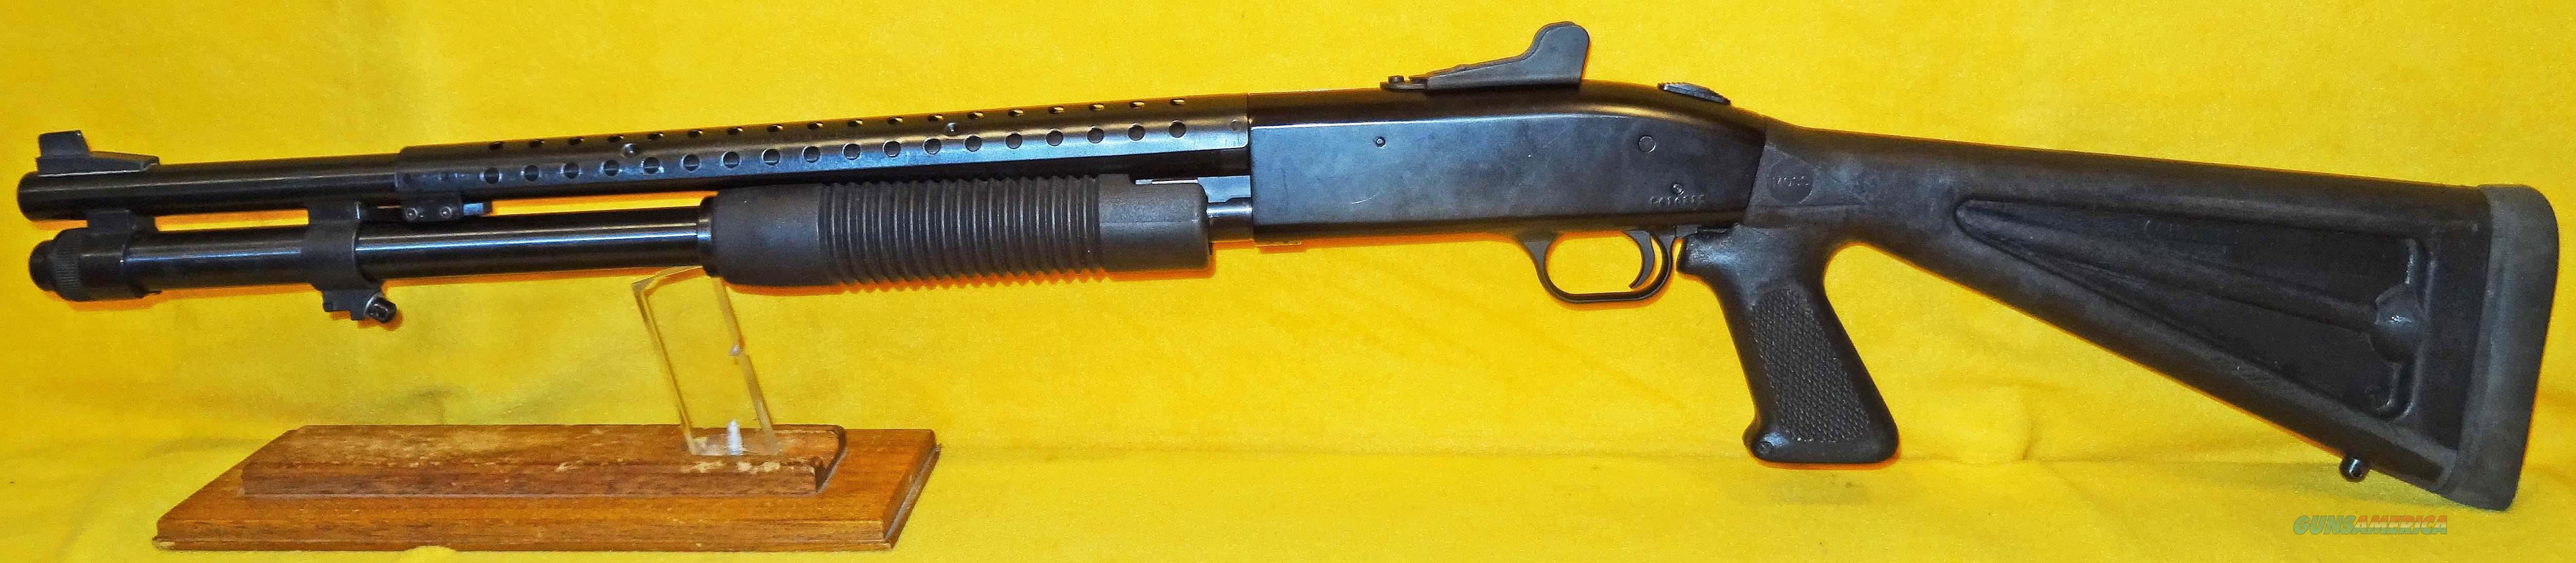 mossberg 500a serial number lookup